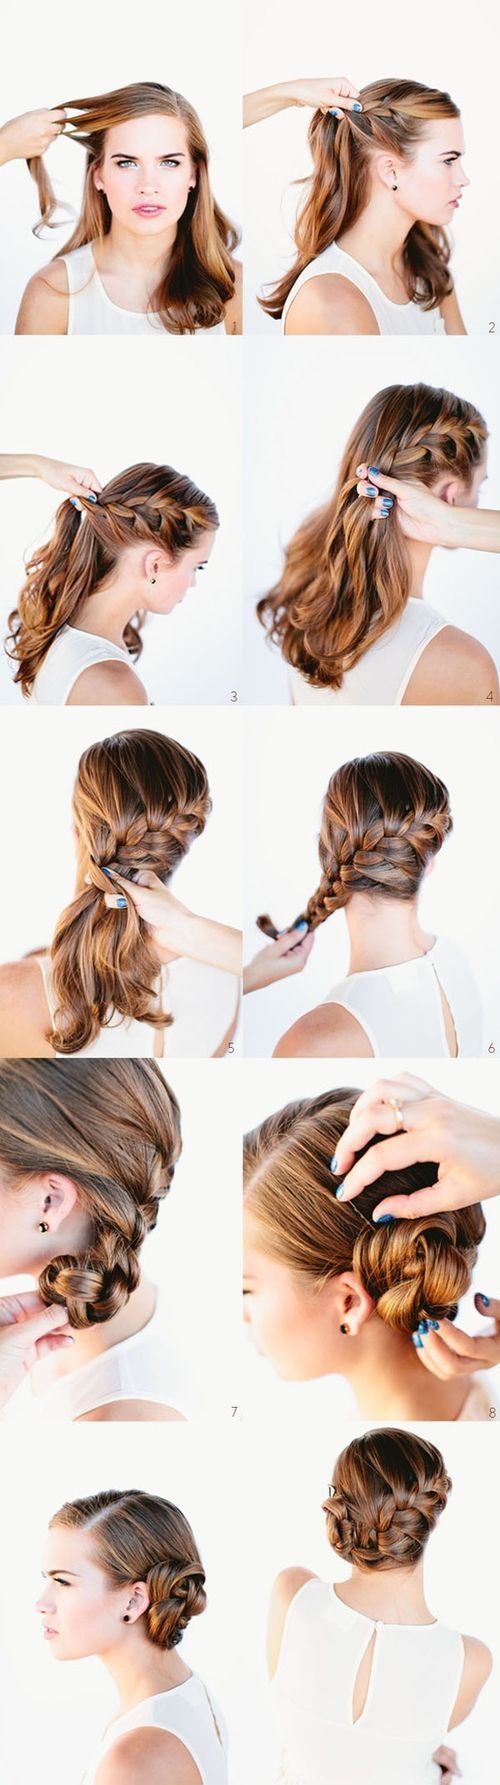 #hairstyle #hairdo #curls #tutorial #howto #DIY #inspiration